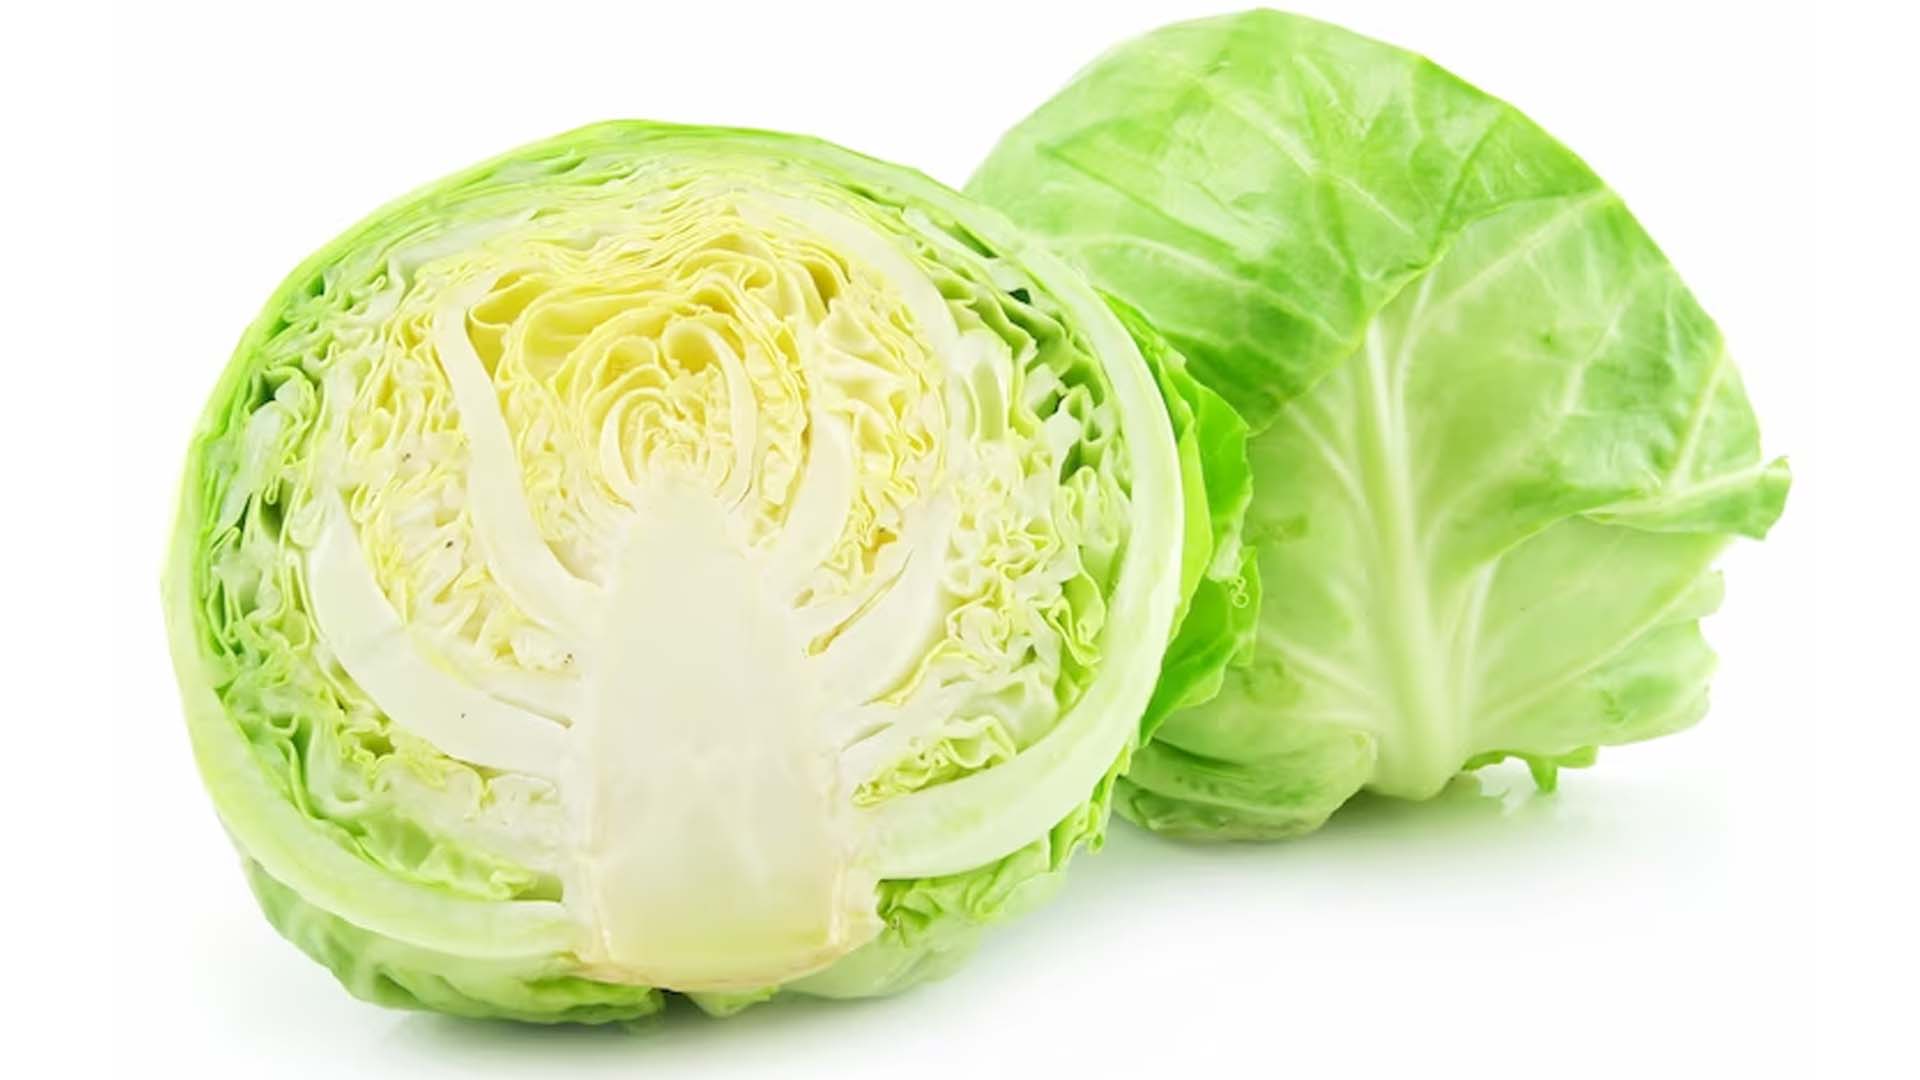 What is the Nutritional Value of Cabbage Per 100g?